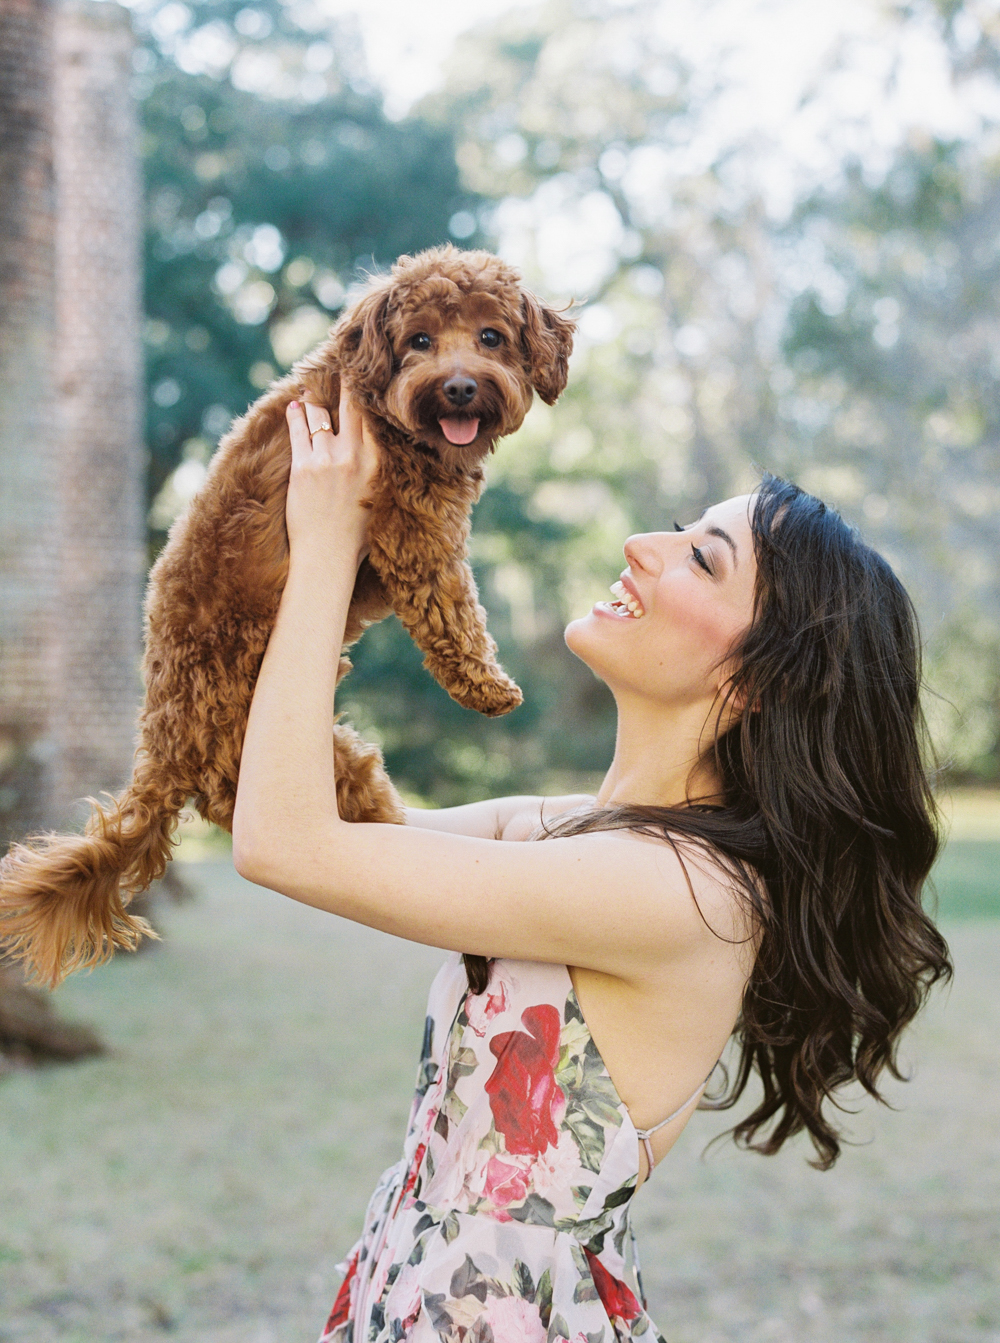 Dogs in engagement photography shoot